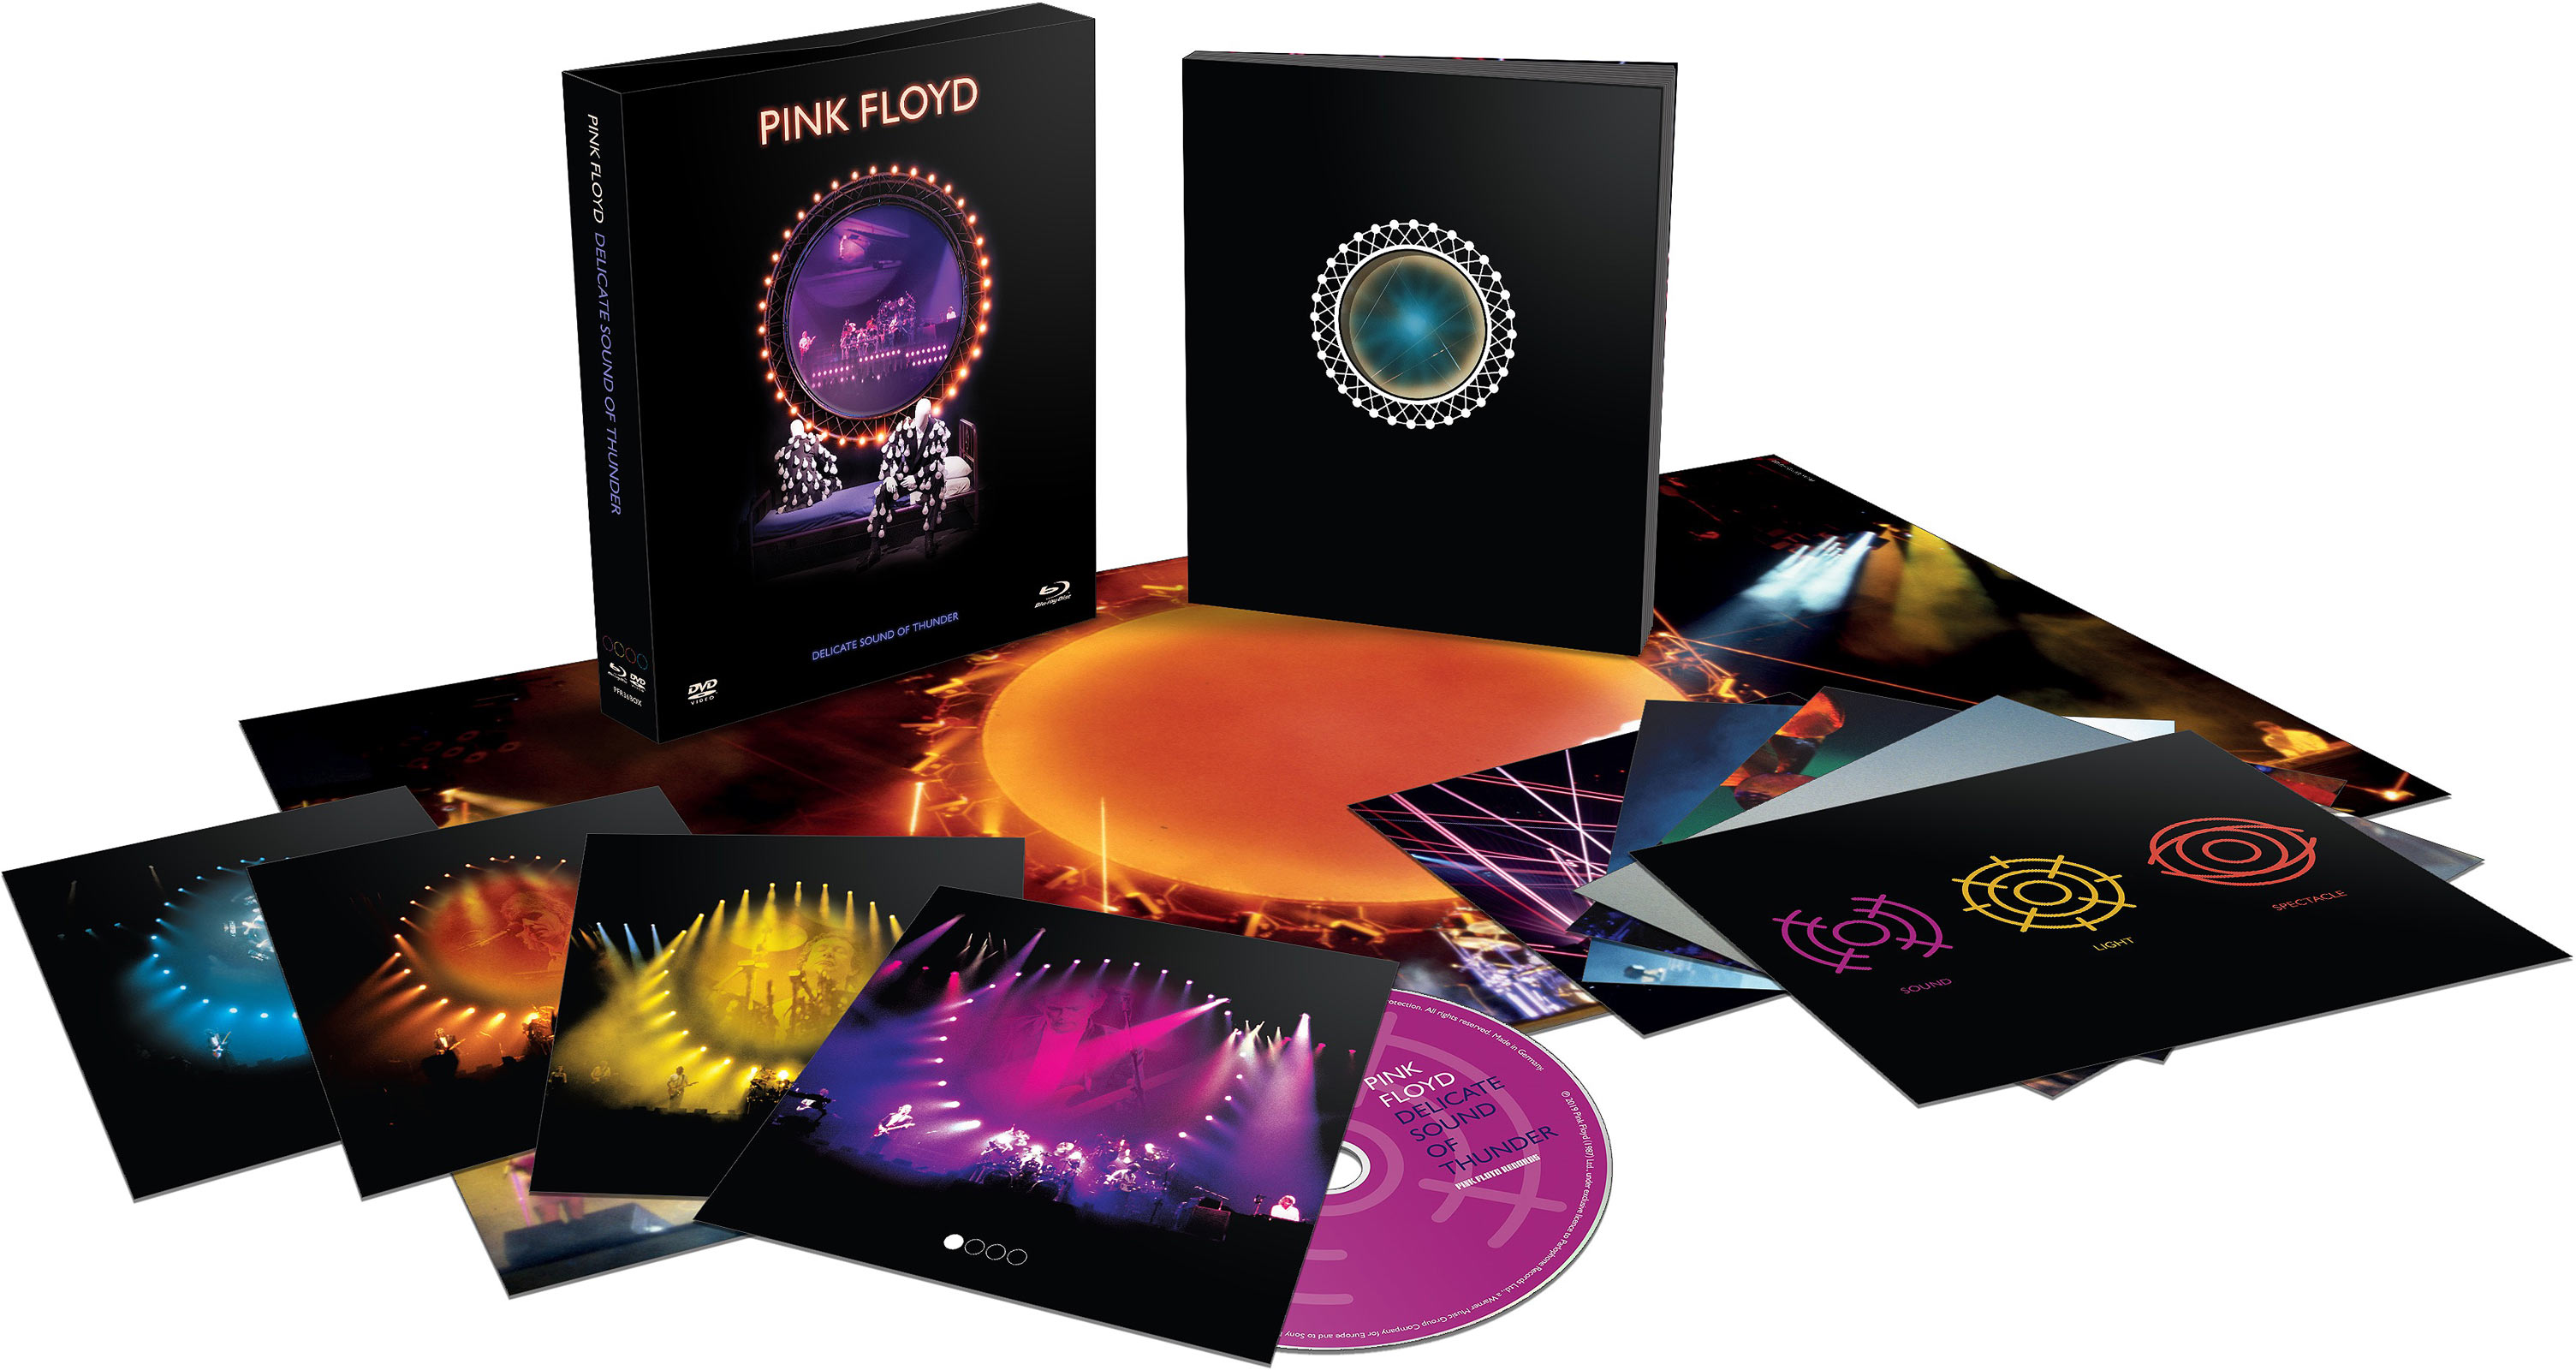 Pink Floyd - Delicate Sound of Thunder - Edition Deluxe Blu-ray + DVD + CD + Livre + Goodies